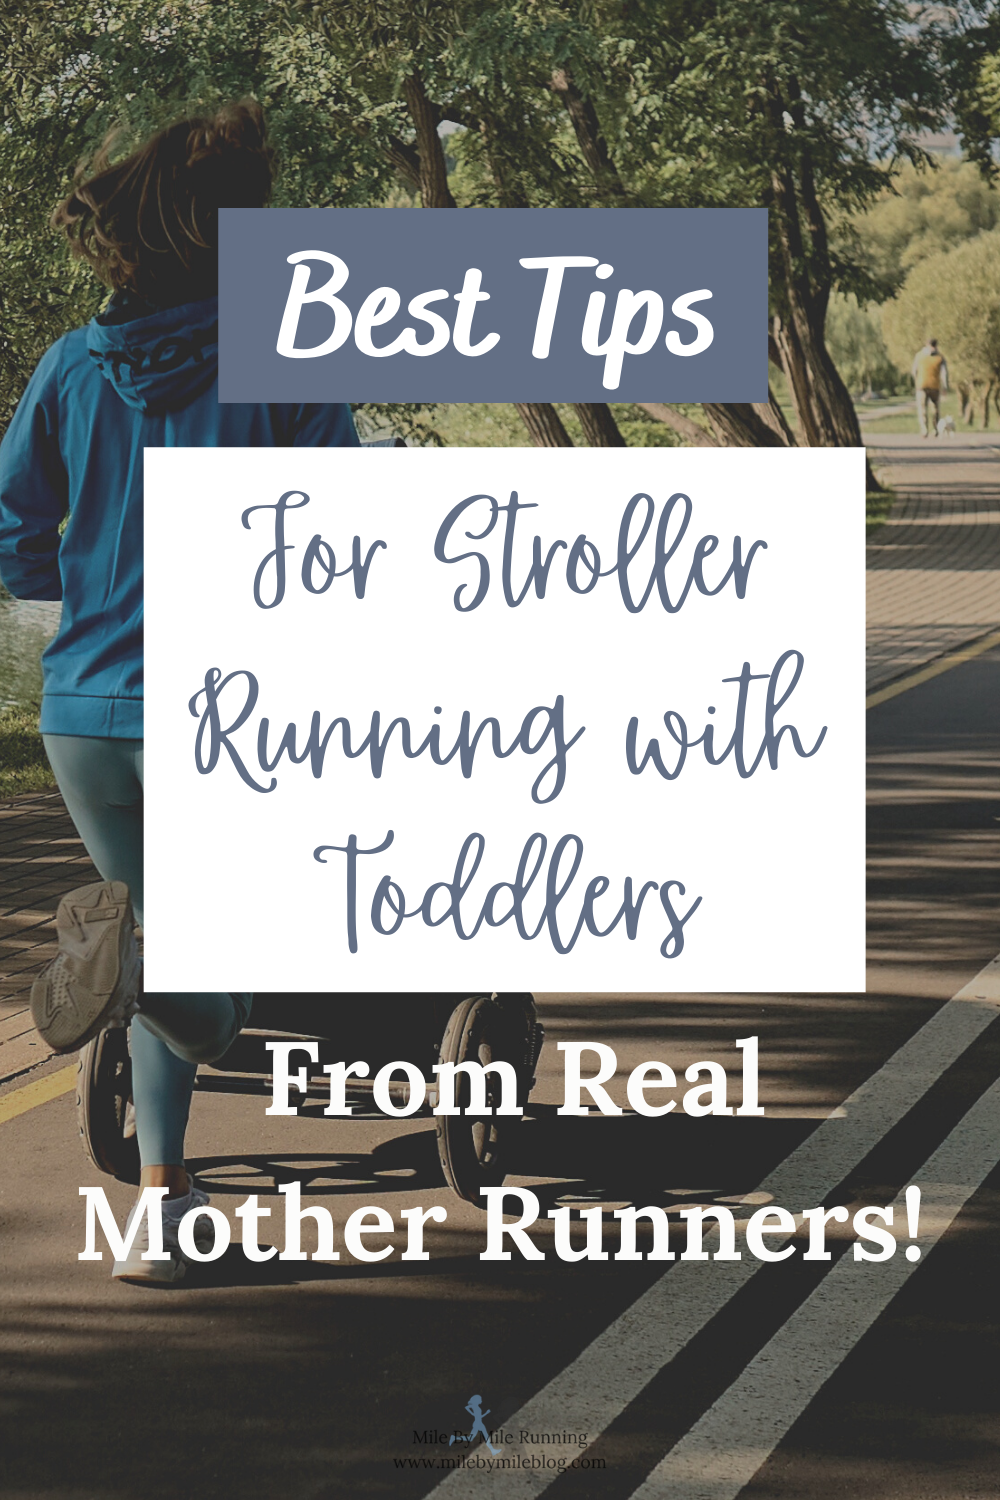 There are so many benefits to stroller running with toddlers. Parents have a way to get their run done, the kids get time outside, and you get to spend time together as a family. So how do you navigate these tricky years? Let's talk about some tips for stroller running with toddlers!